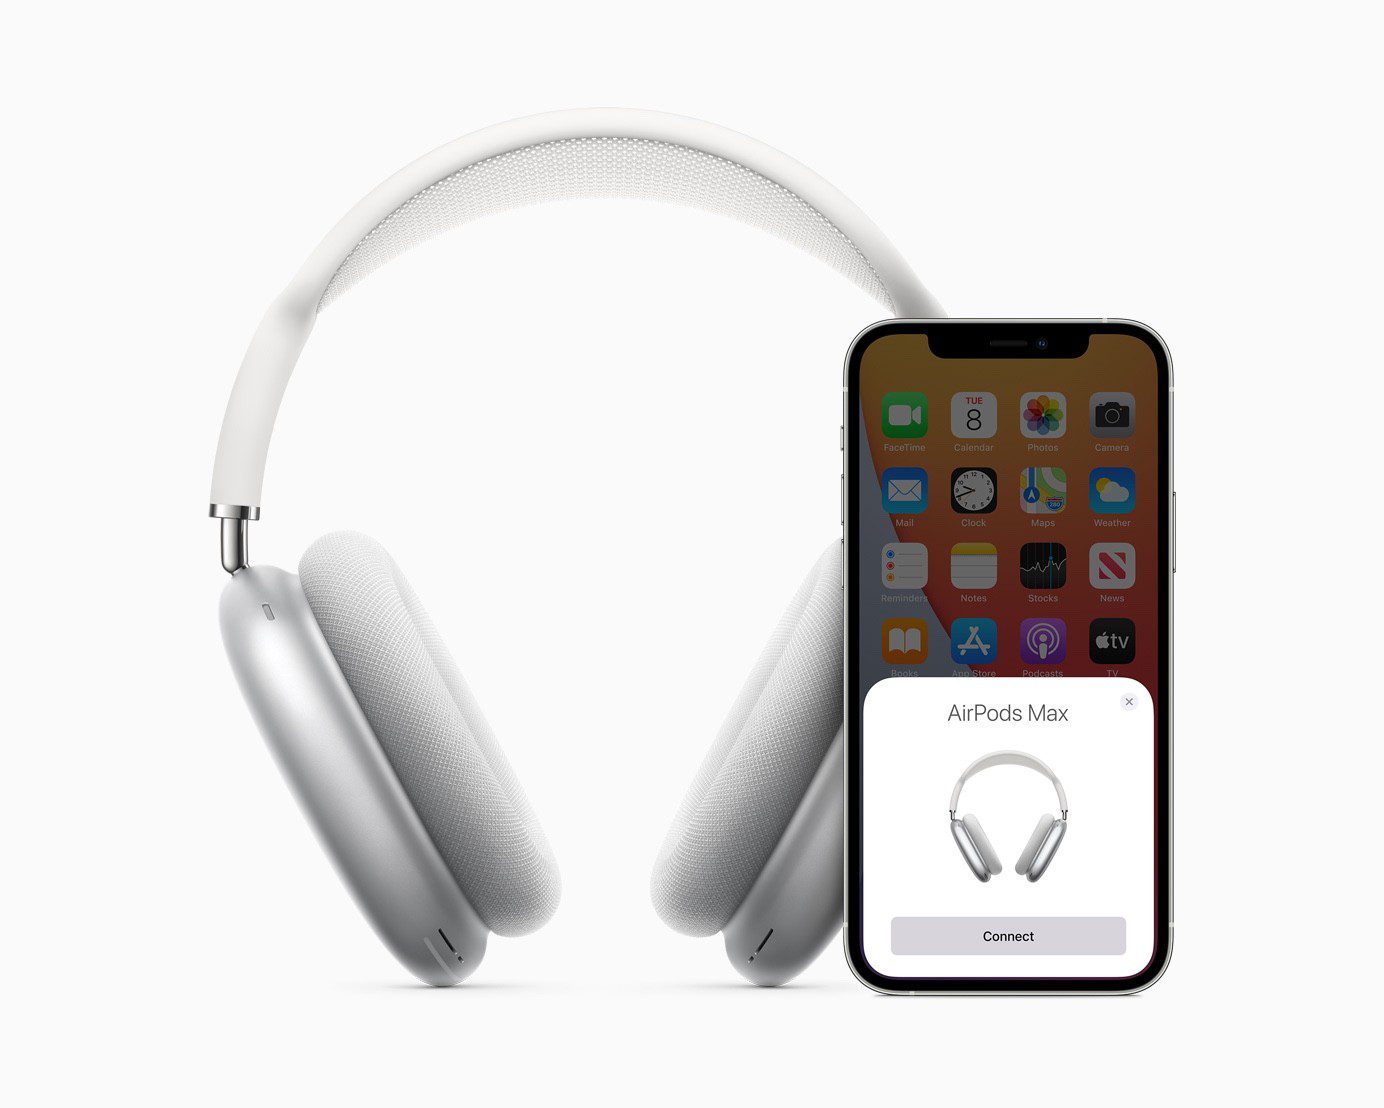 AirPods Max paired up with iPhone 12